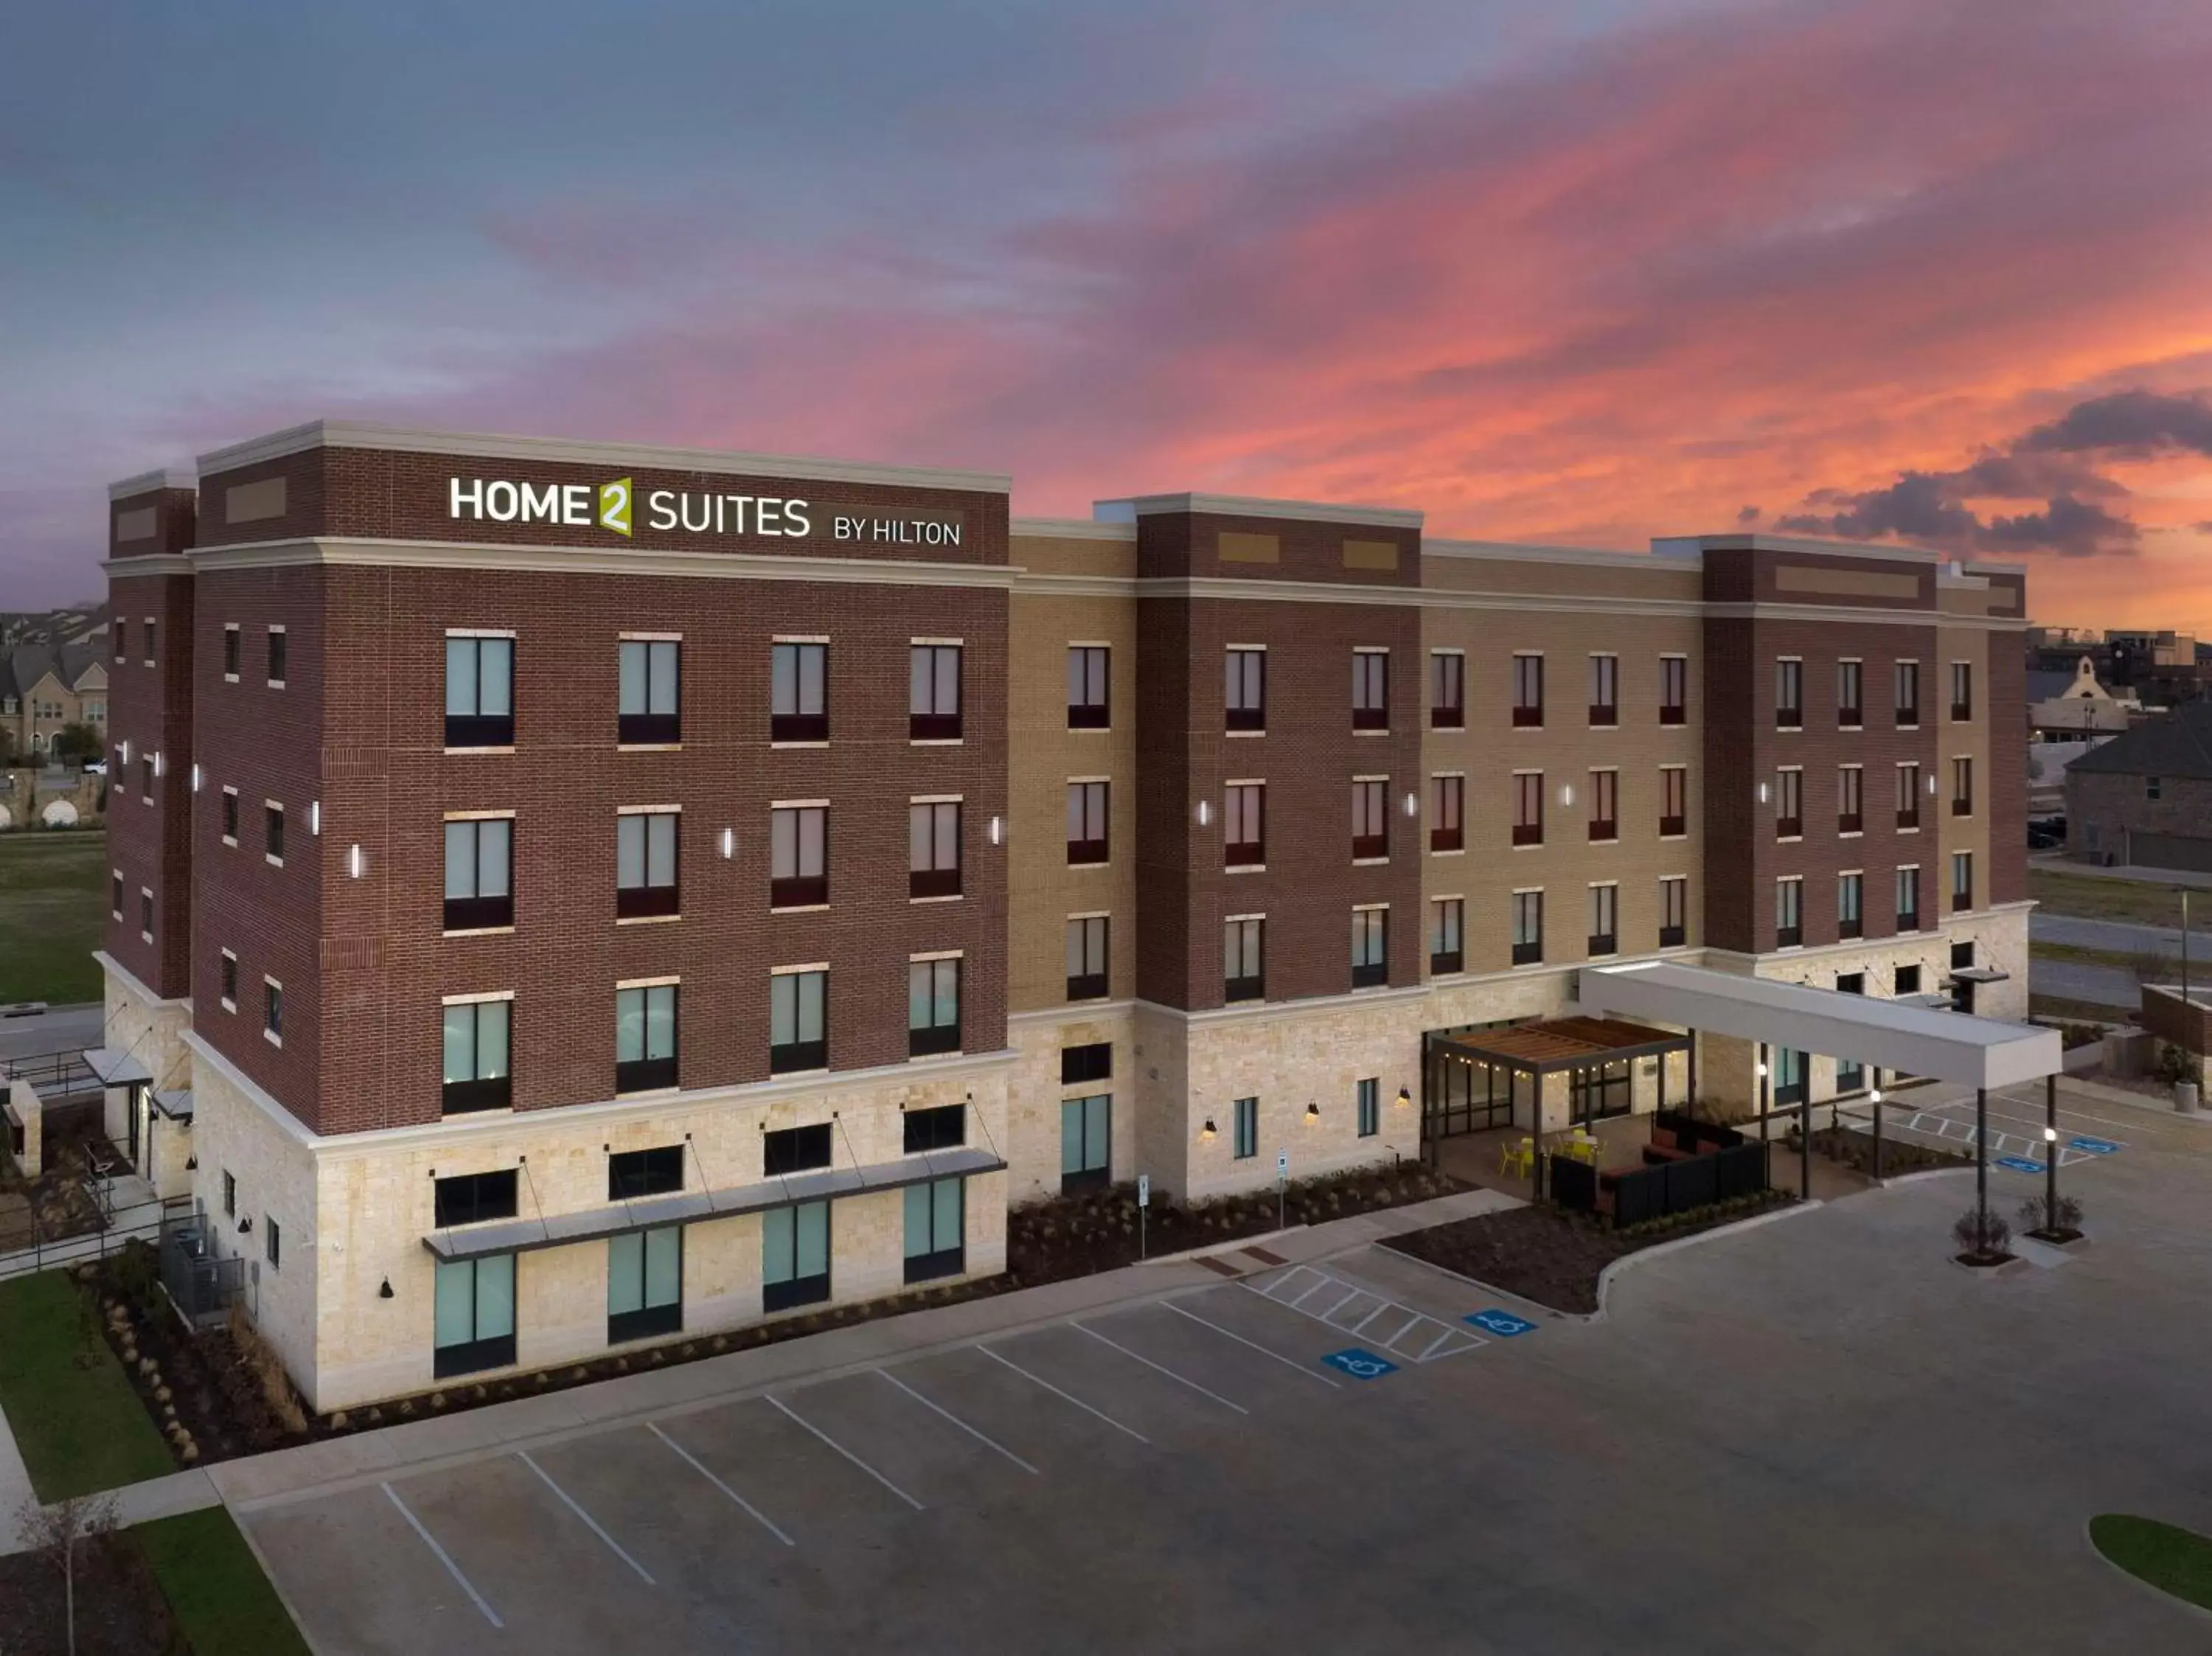 Property Building in Home2 Suites By Hilton Flower Mound Dallas